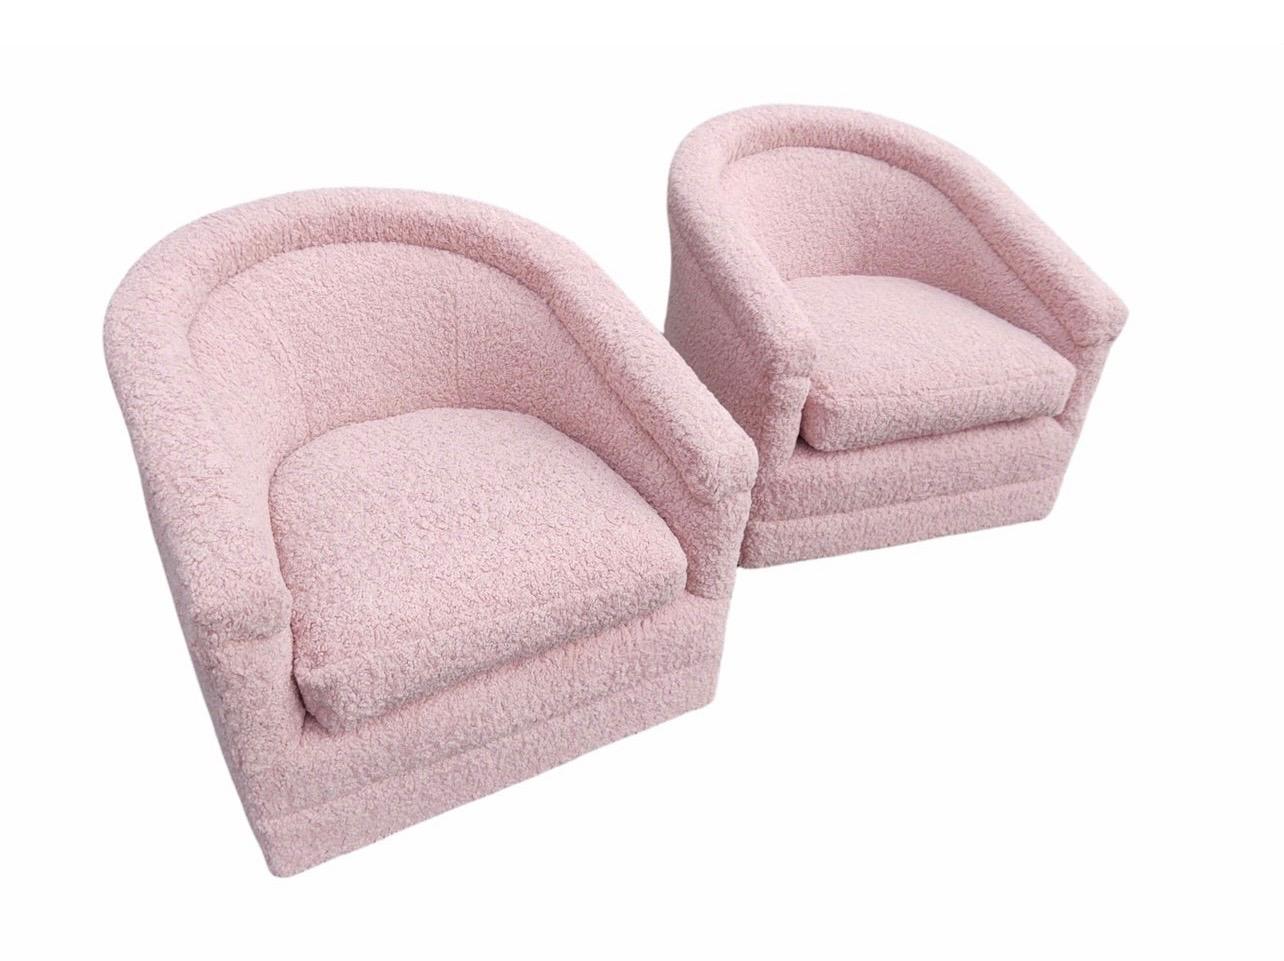 Pair of Blush Pink Shearling Boucle Tub Chairs on Casters Newly Upholstered 3